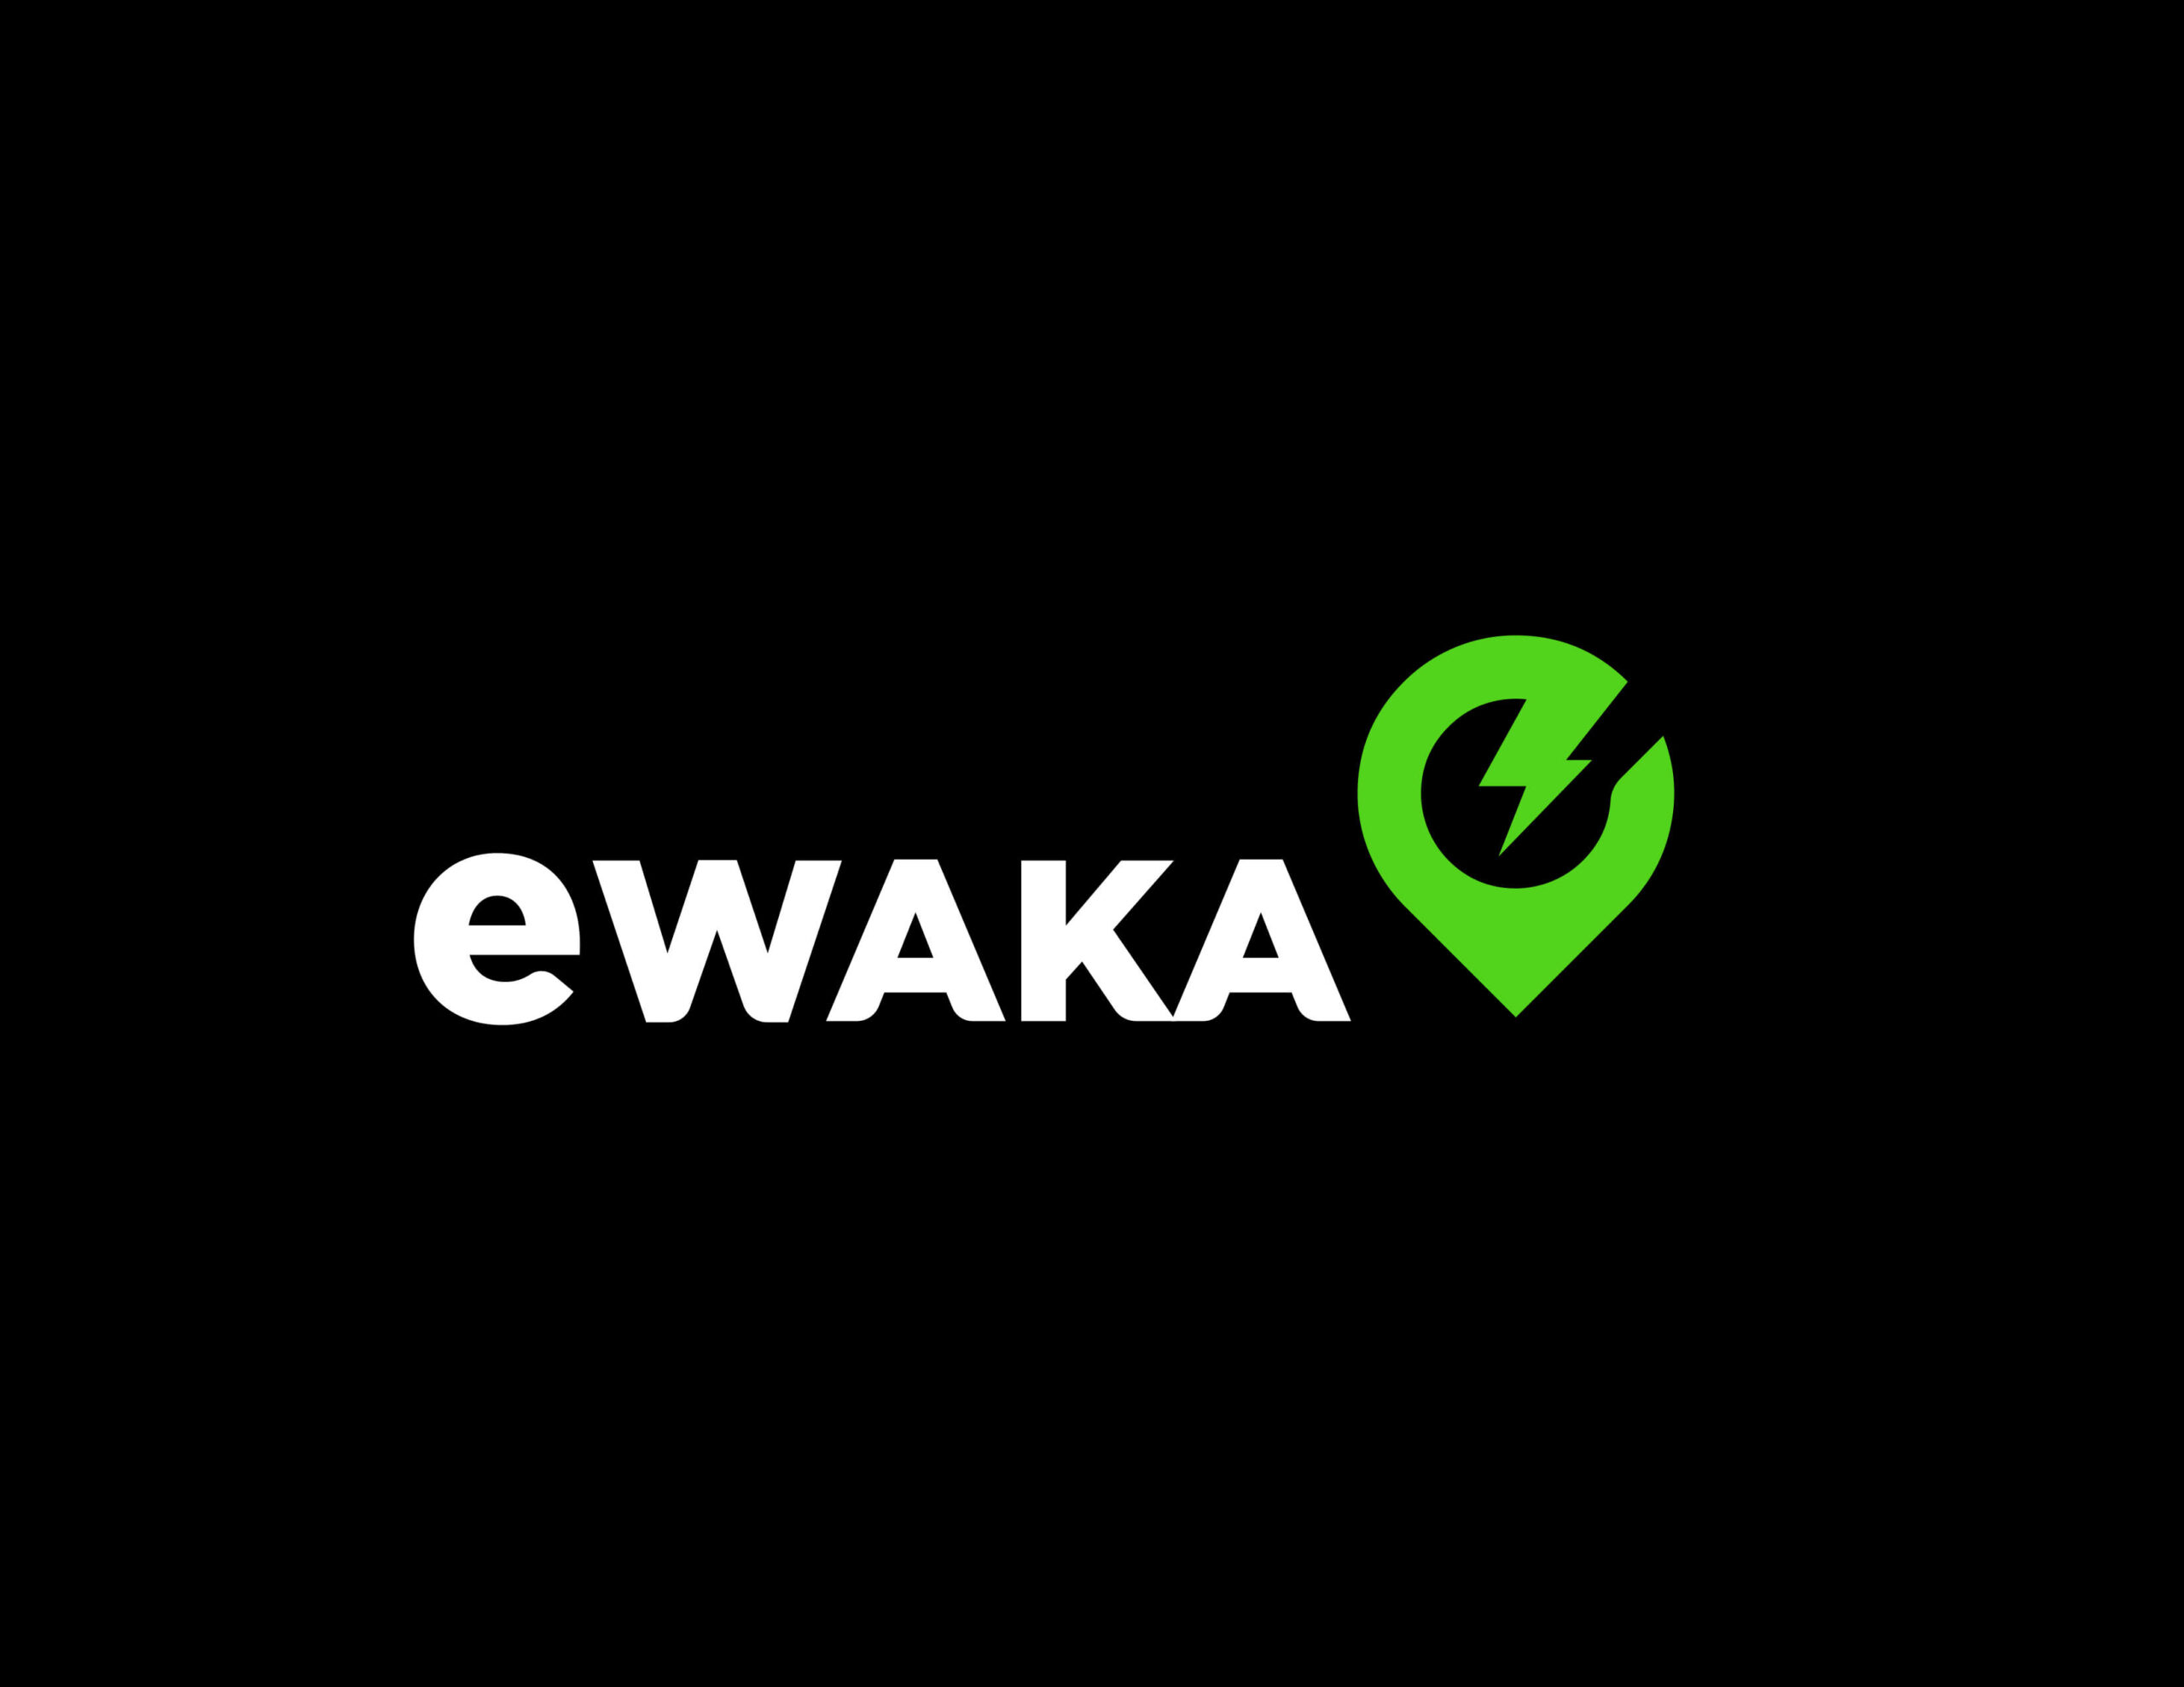 eWAKA and THE PULSE Sign Strategic Commercial Agreement